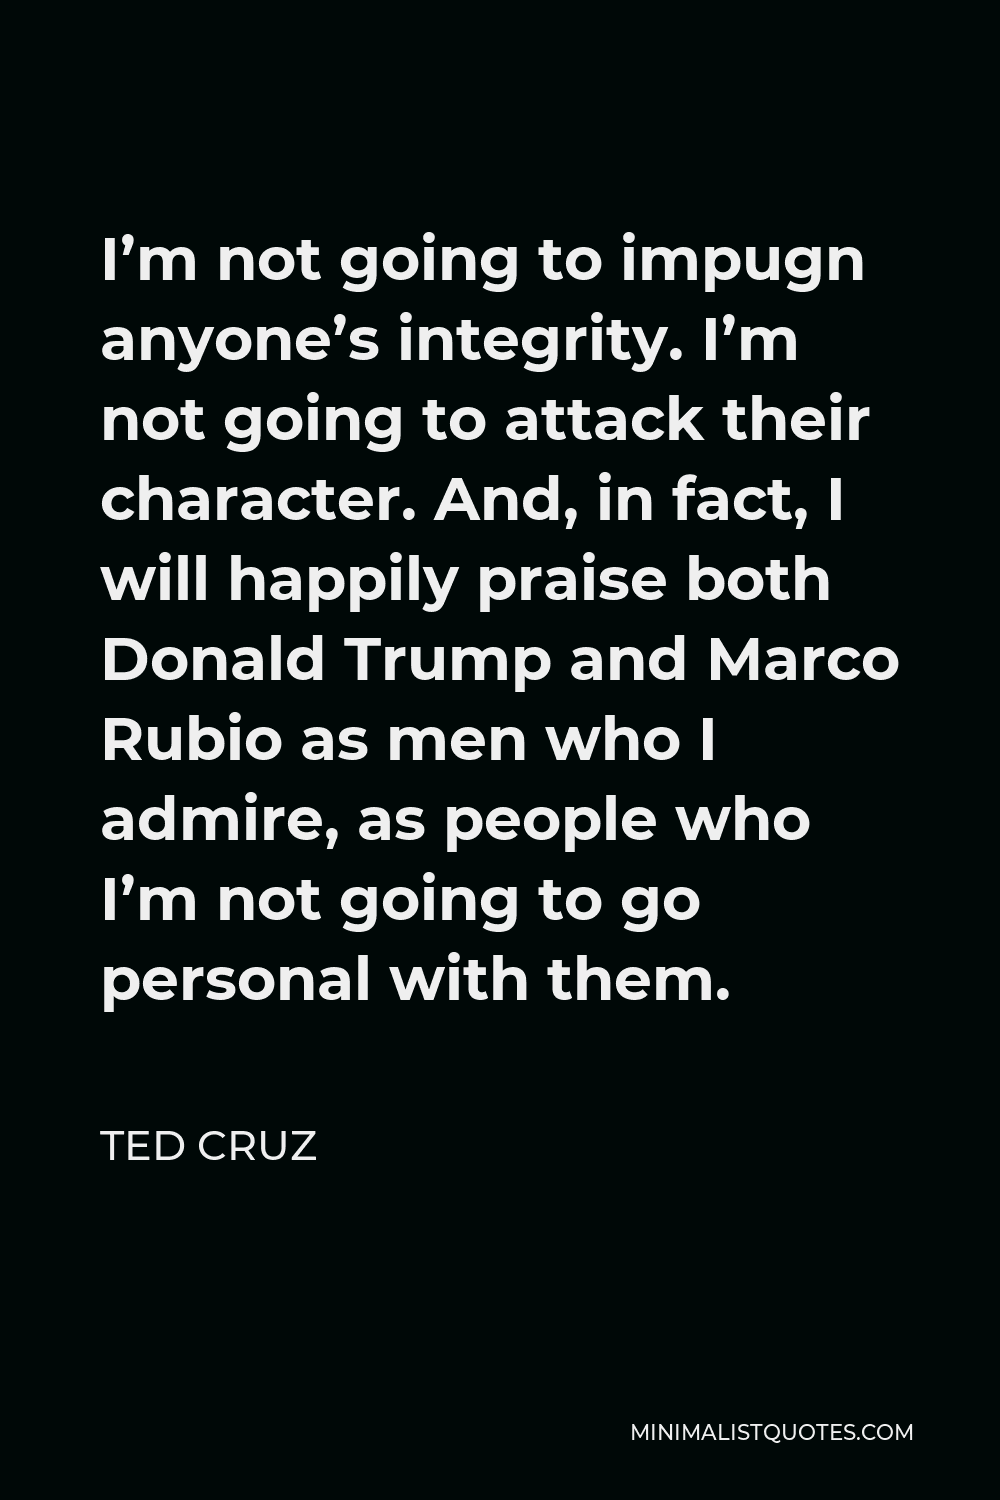 Ted Cruz Quote - I’m not going to impugn anyone’s integrity. I’m not going to attack their character. And, in fact, I will happily praise both Donald Trump and Marco Rubio as men who I admire, as people who I’m not going to go personal with them.